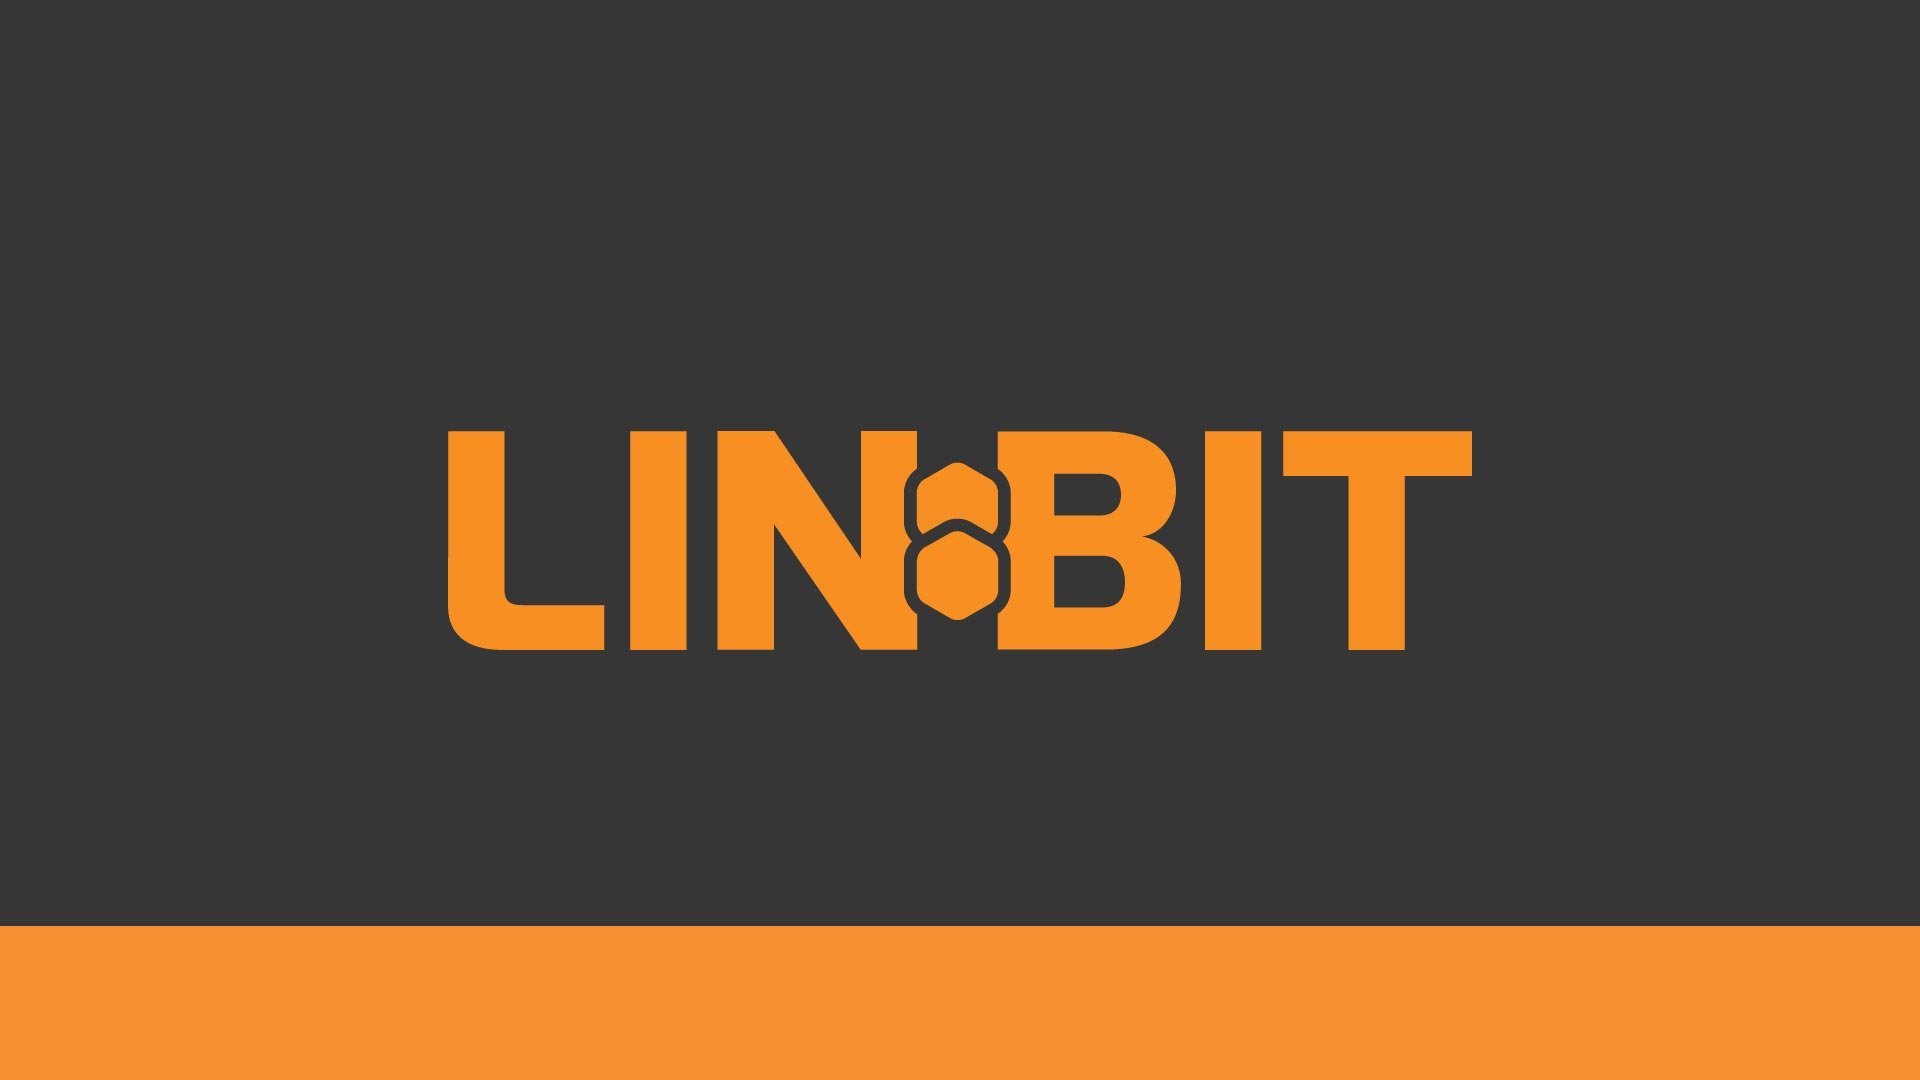 Improving the SEO and quality of all written content at LINBIT to ready the company for success.